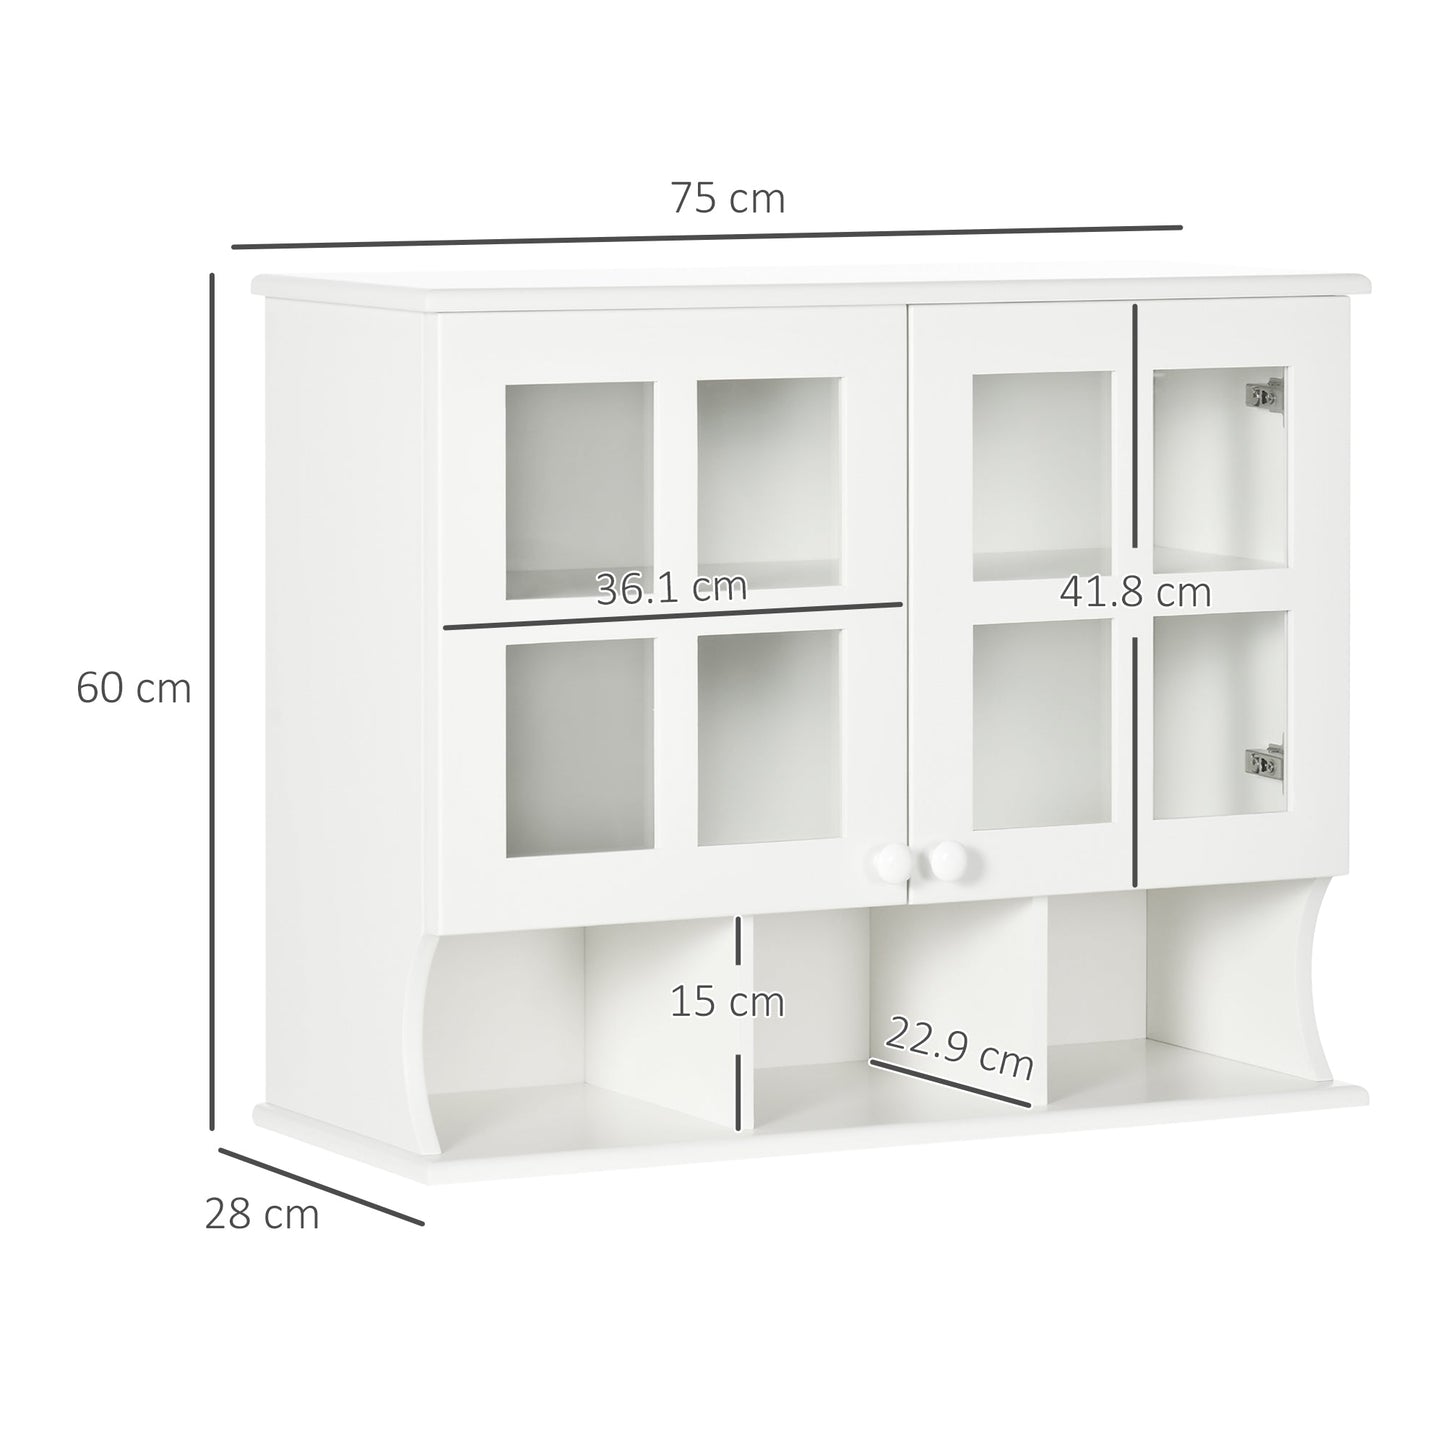 HOMCOM Wall-Mounted Bathroom Medicine Cabinet, Modern Bathroom Cabinet with Shelves for Living Room and Entryway, White